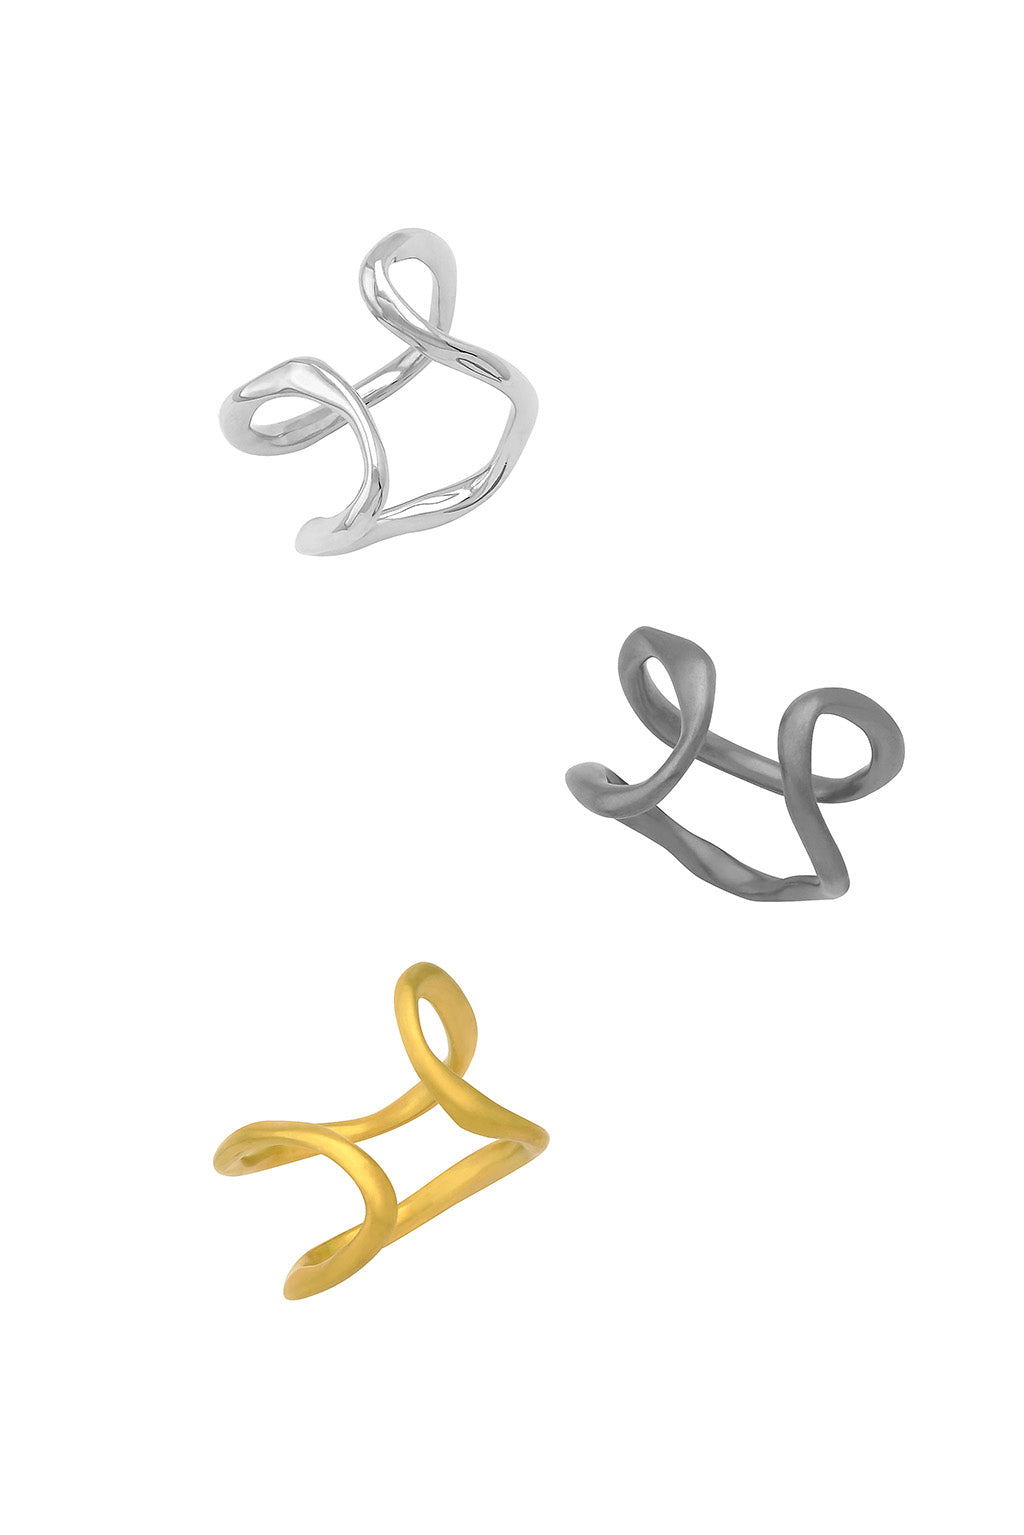 Ring Asymmetry Forms